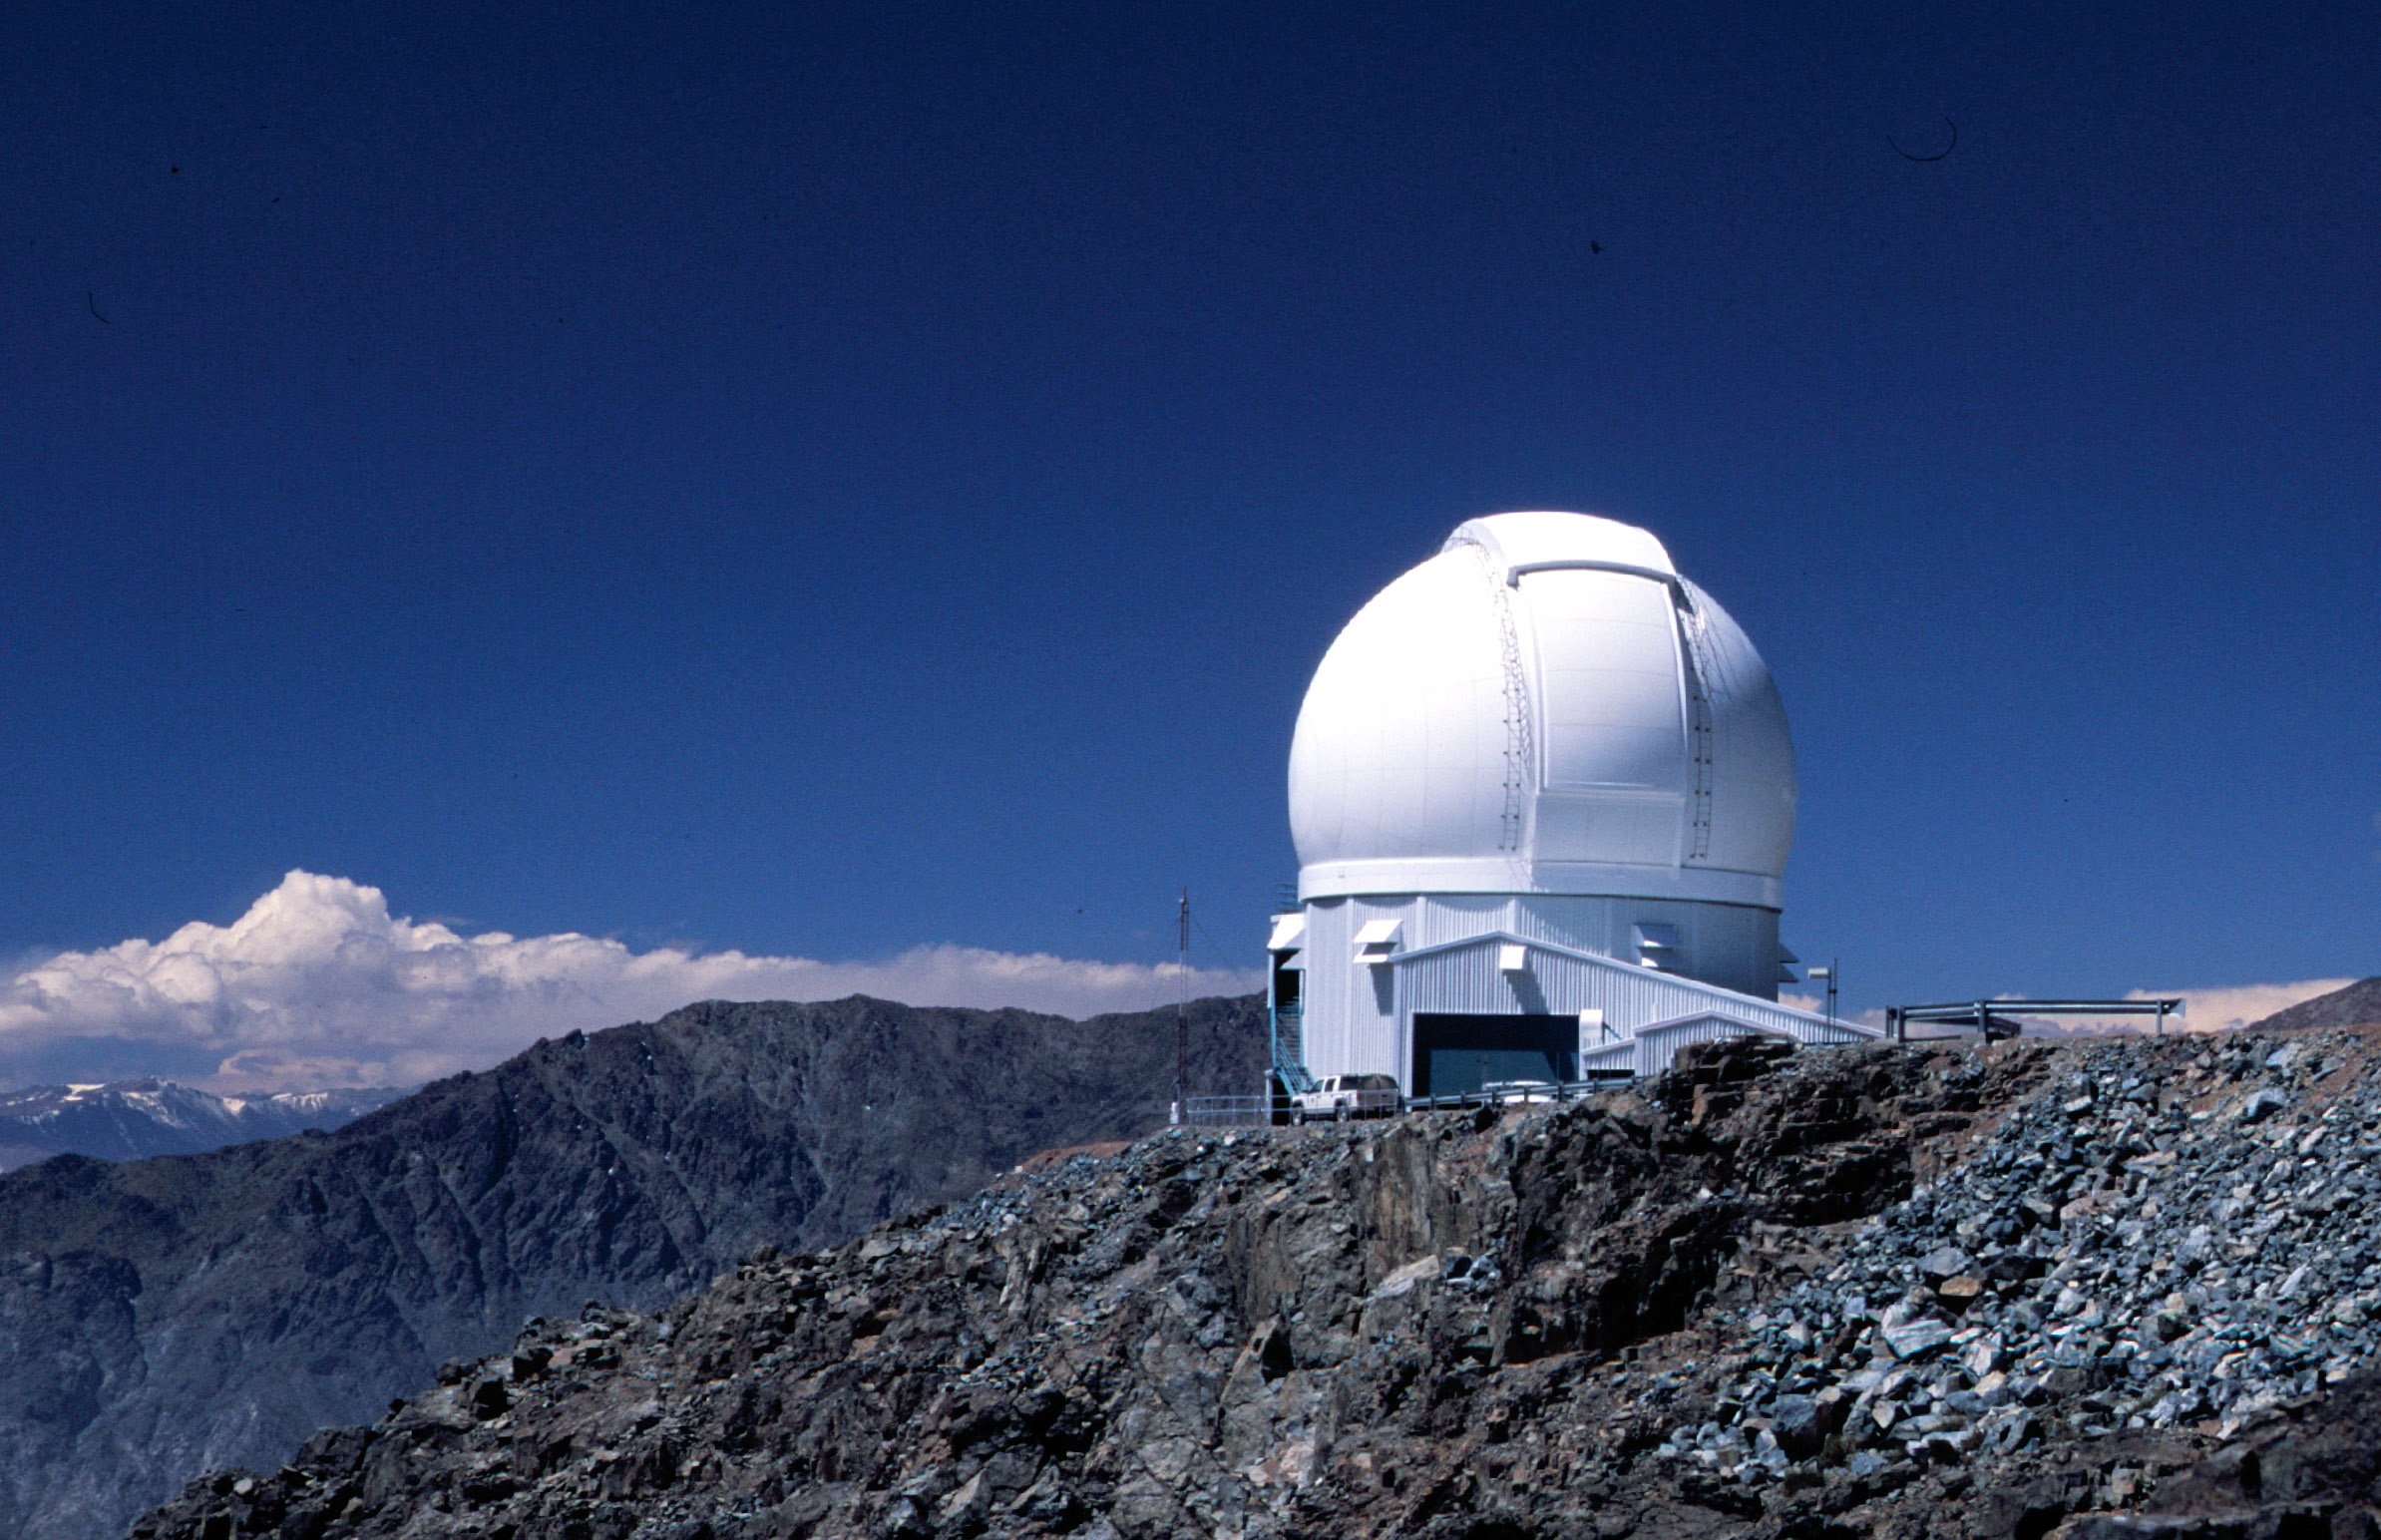 The dome of the SOAR telescope observatory 8,775 feet in the Chilean Andes is shown in this photo.